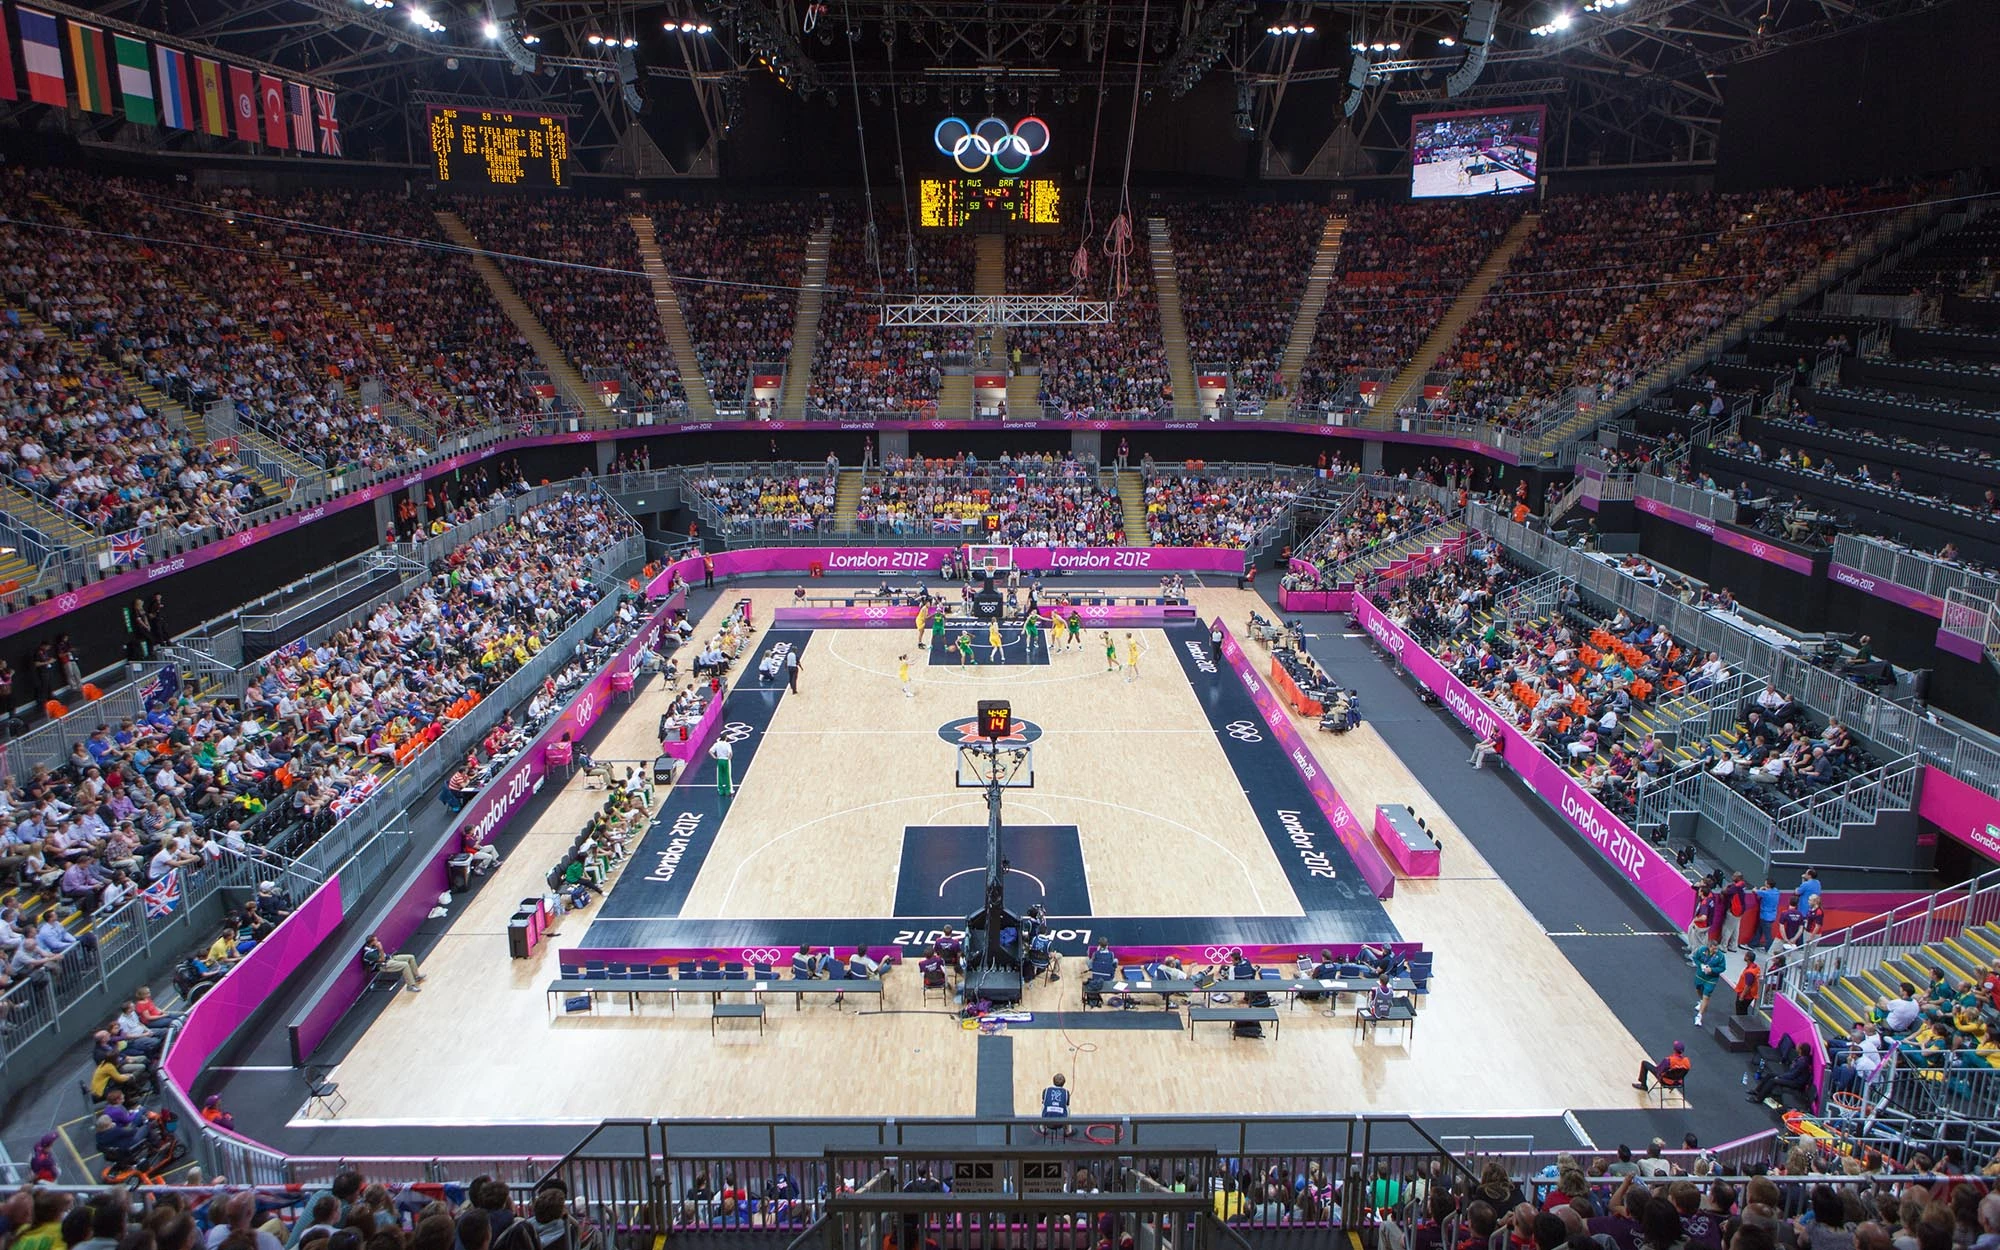 Interior of Olympic Basketball Arena